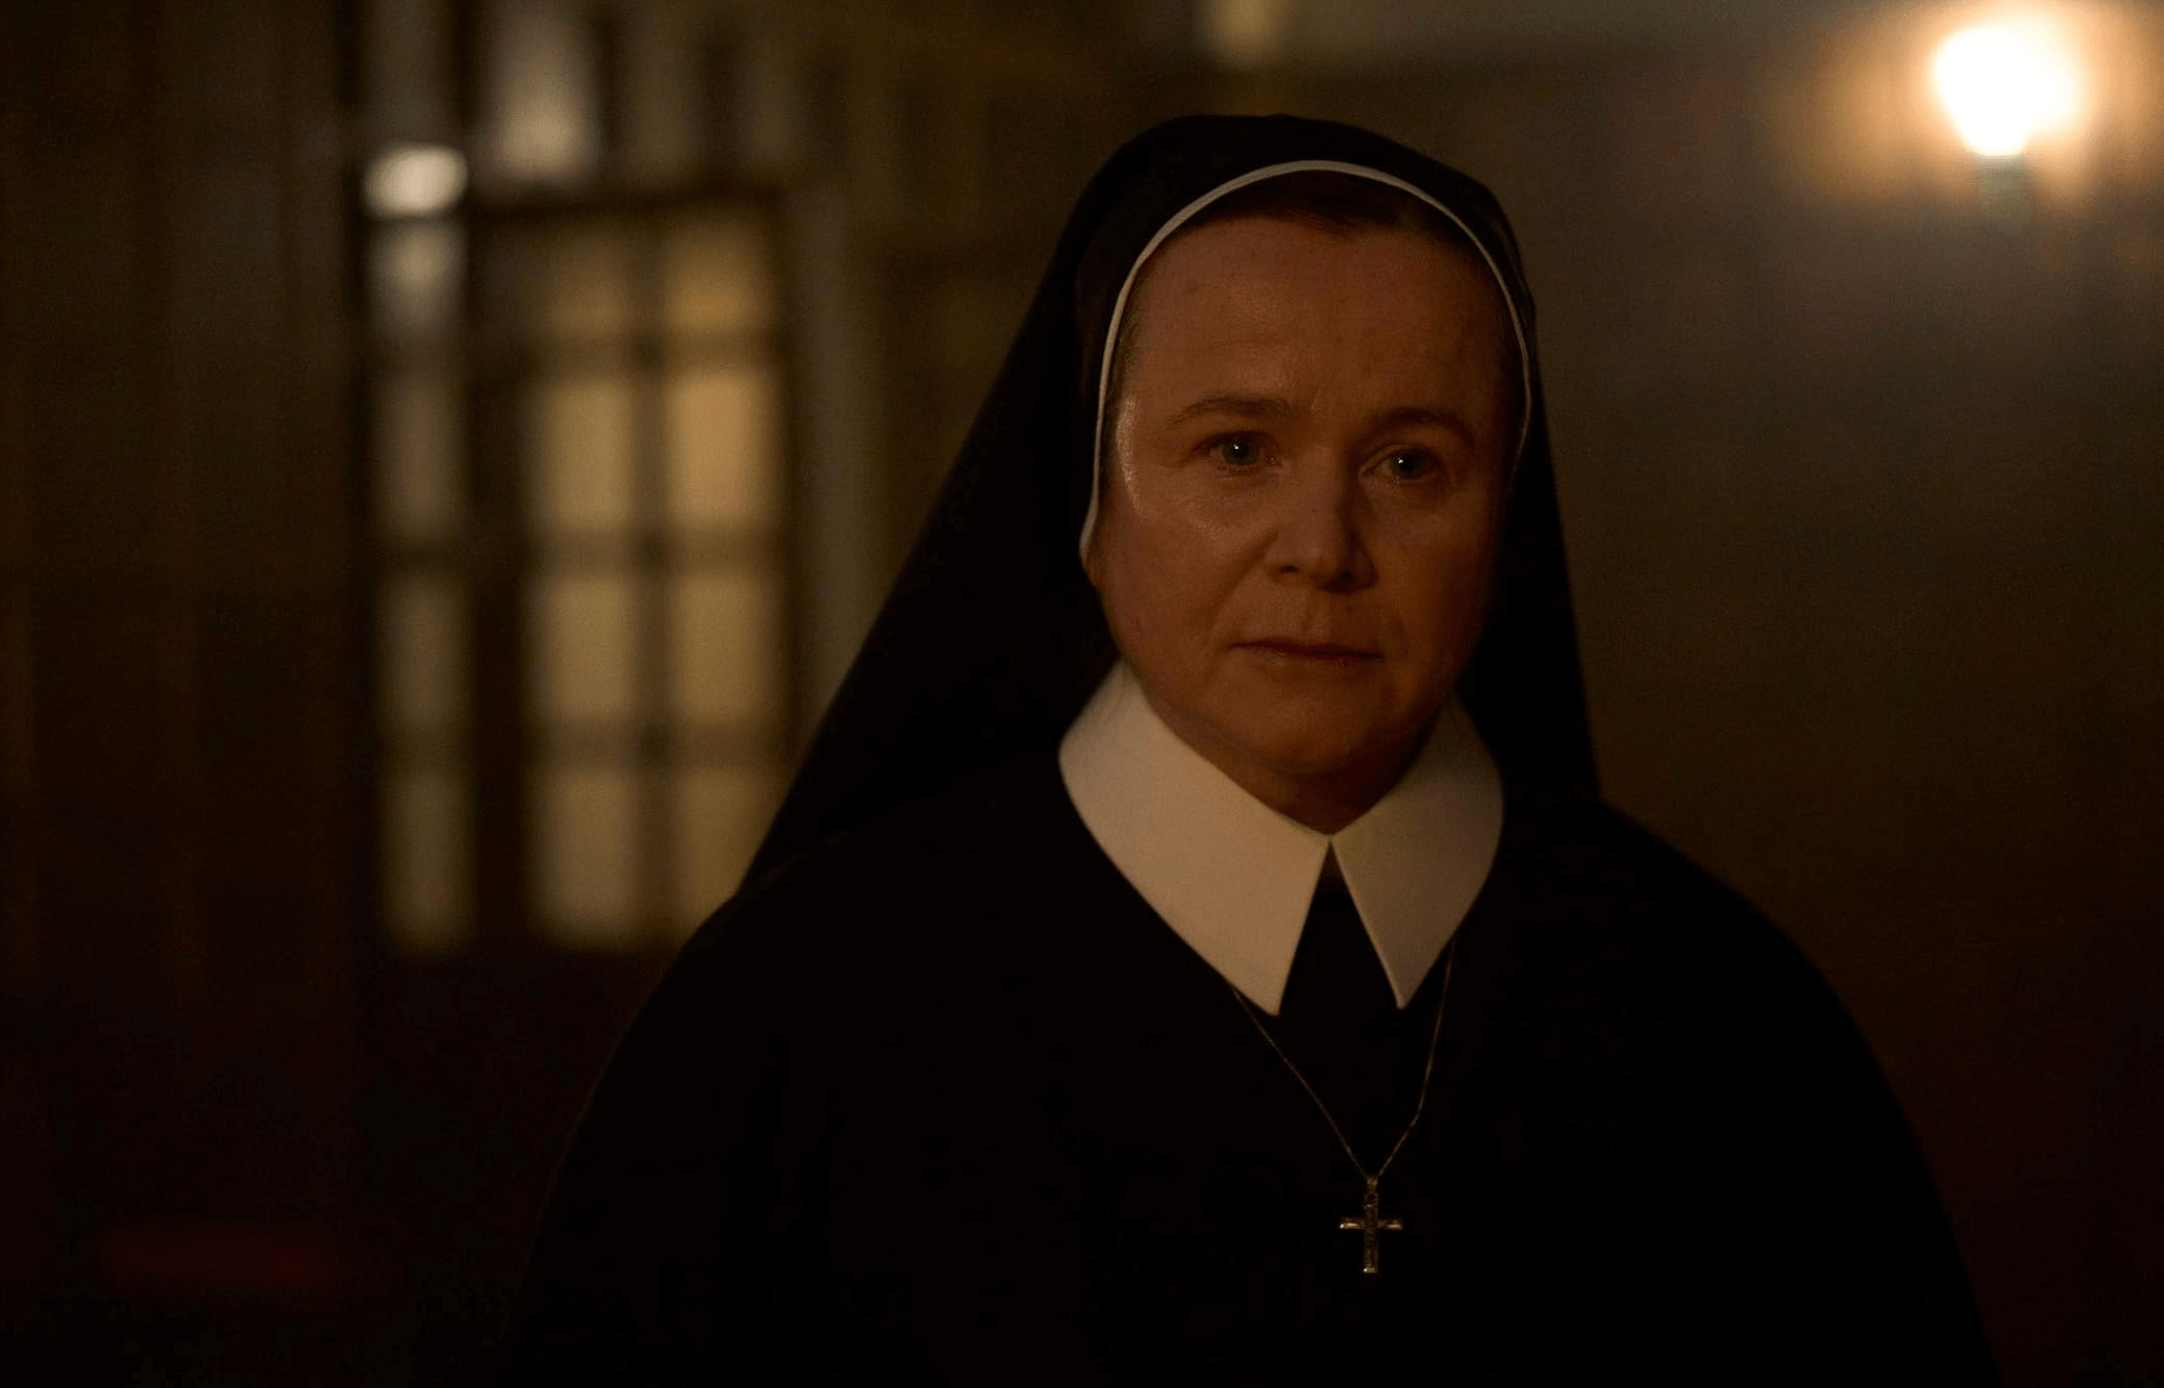 Emily Watson as Sister Mary in “Small Things Like These"